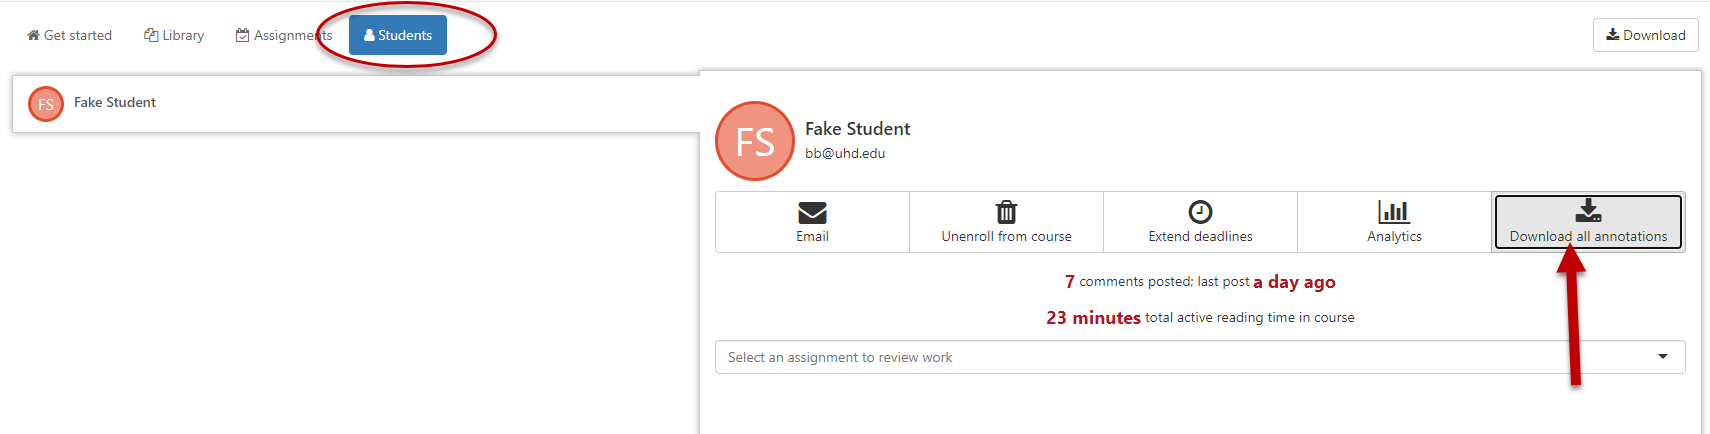 Download all annotations on the Students tab